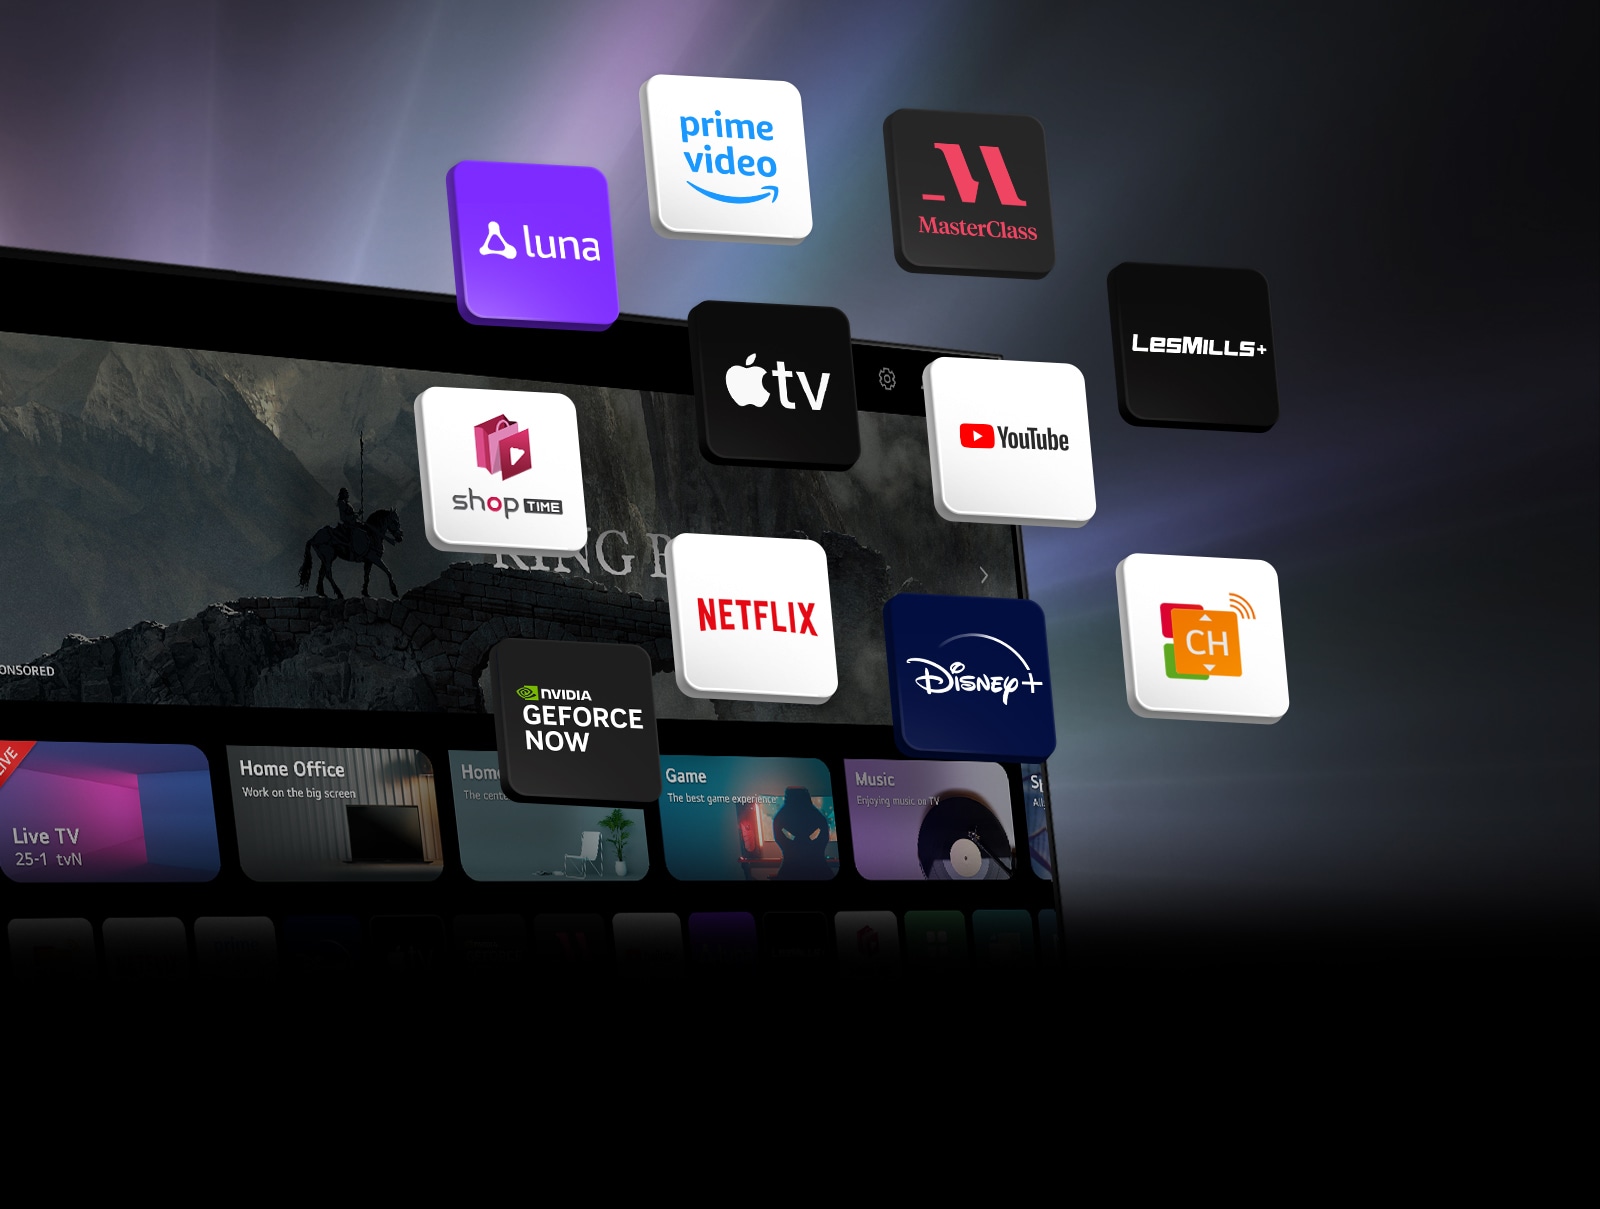 The LG TV webOS screen is in the background and 11 blocks are floating on it. Each block has a logo image of Luna, Prime Video, Master Class, Les Mills, YouTube, Apple TV plus, Shoptime, Netflix, Disney plus, GeForce NOW, and LG Channels.